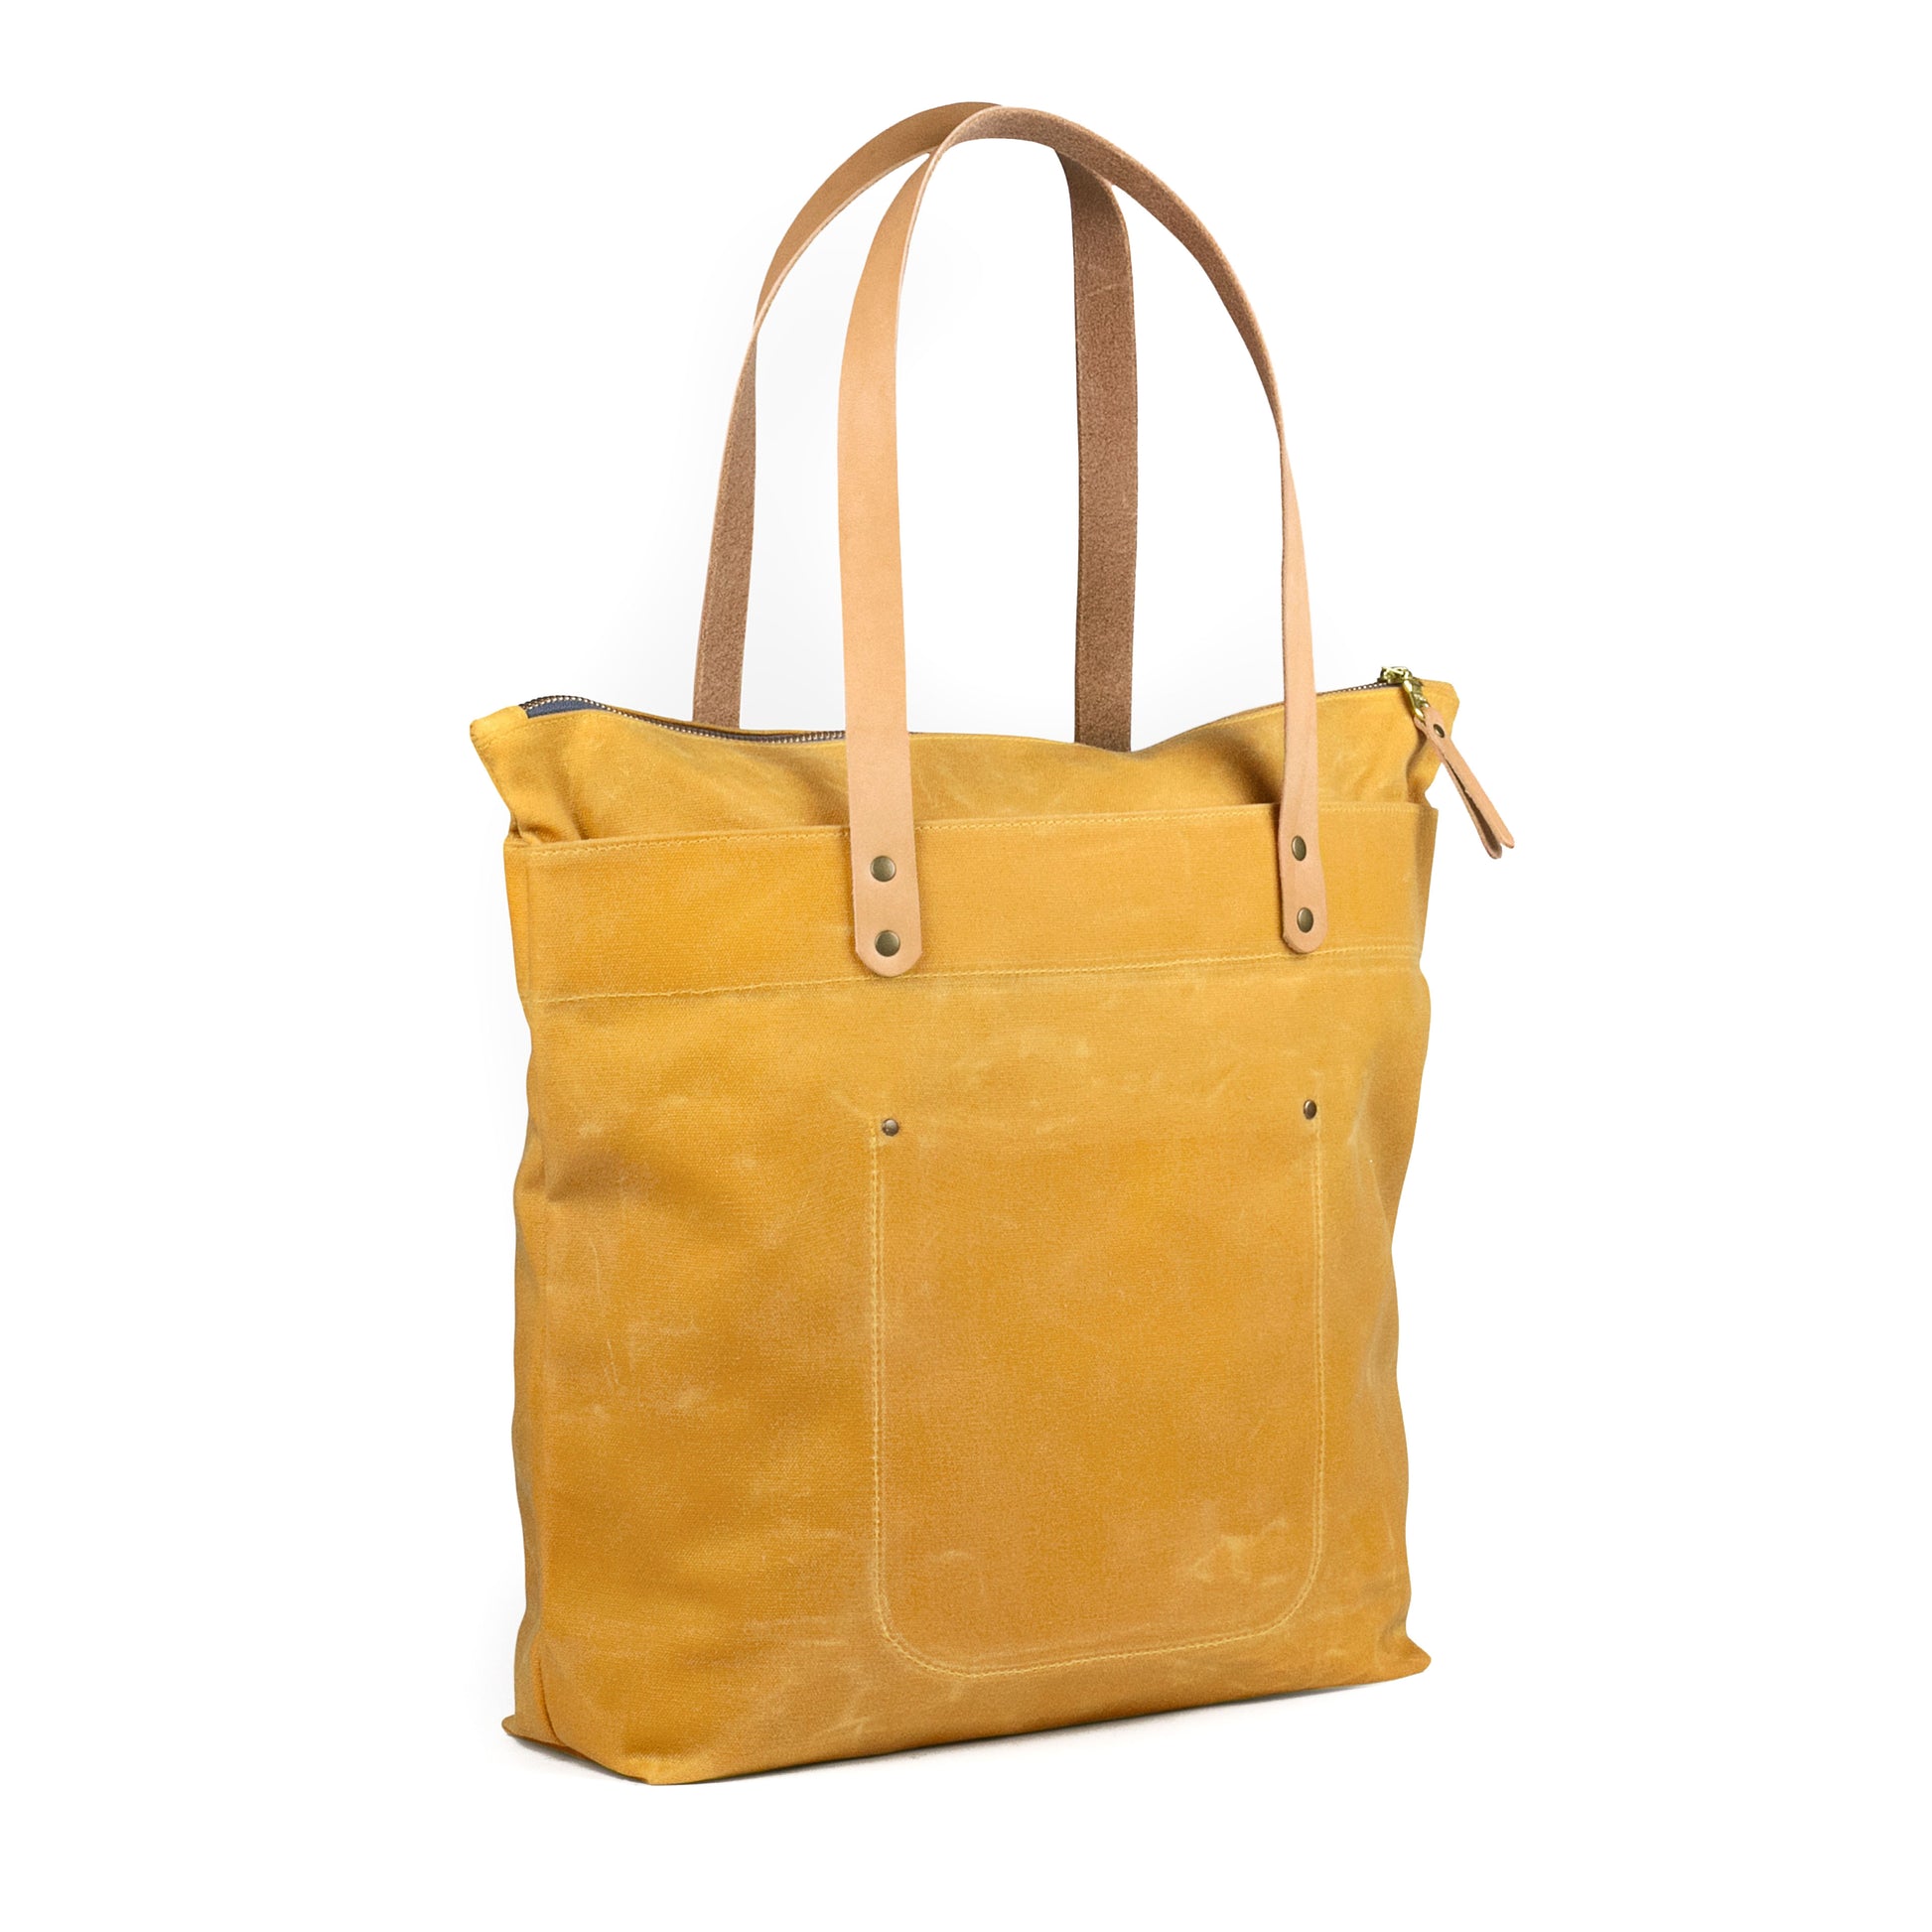 Zipper Tote Yellow Waxed Canvas & Natural Leather